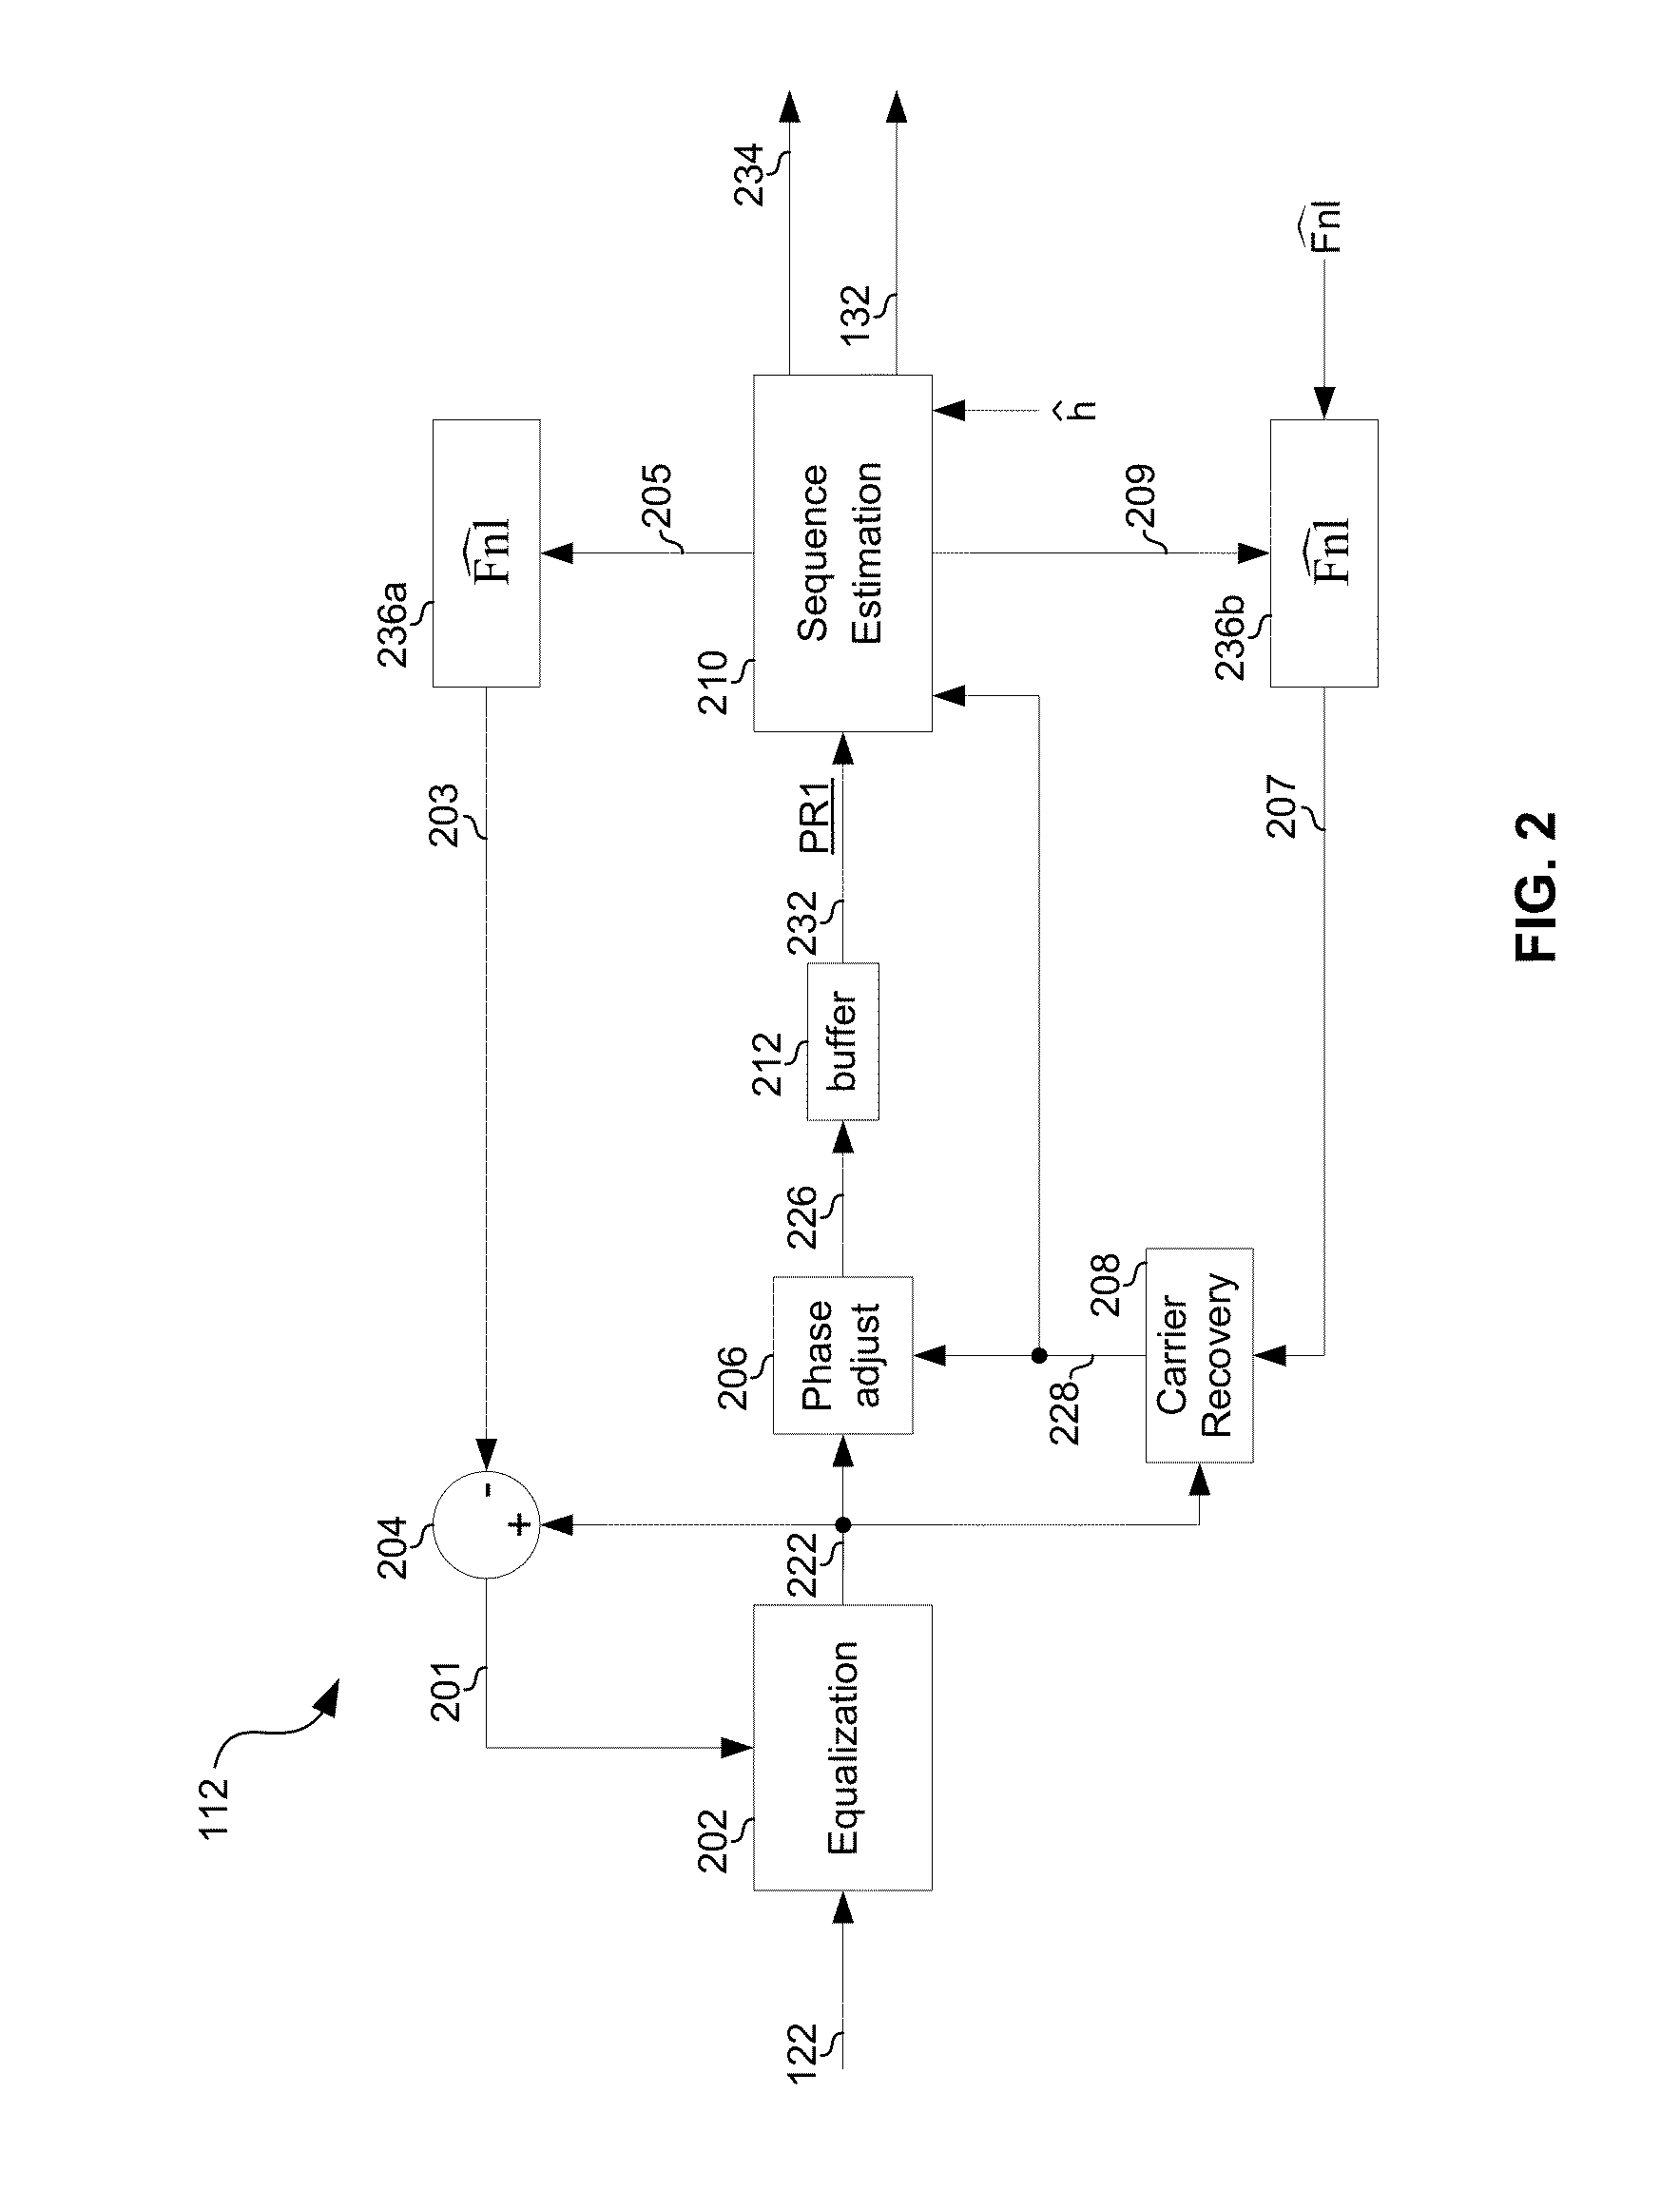 Highly-spectrally-efficient receiver